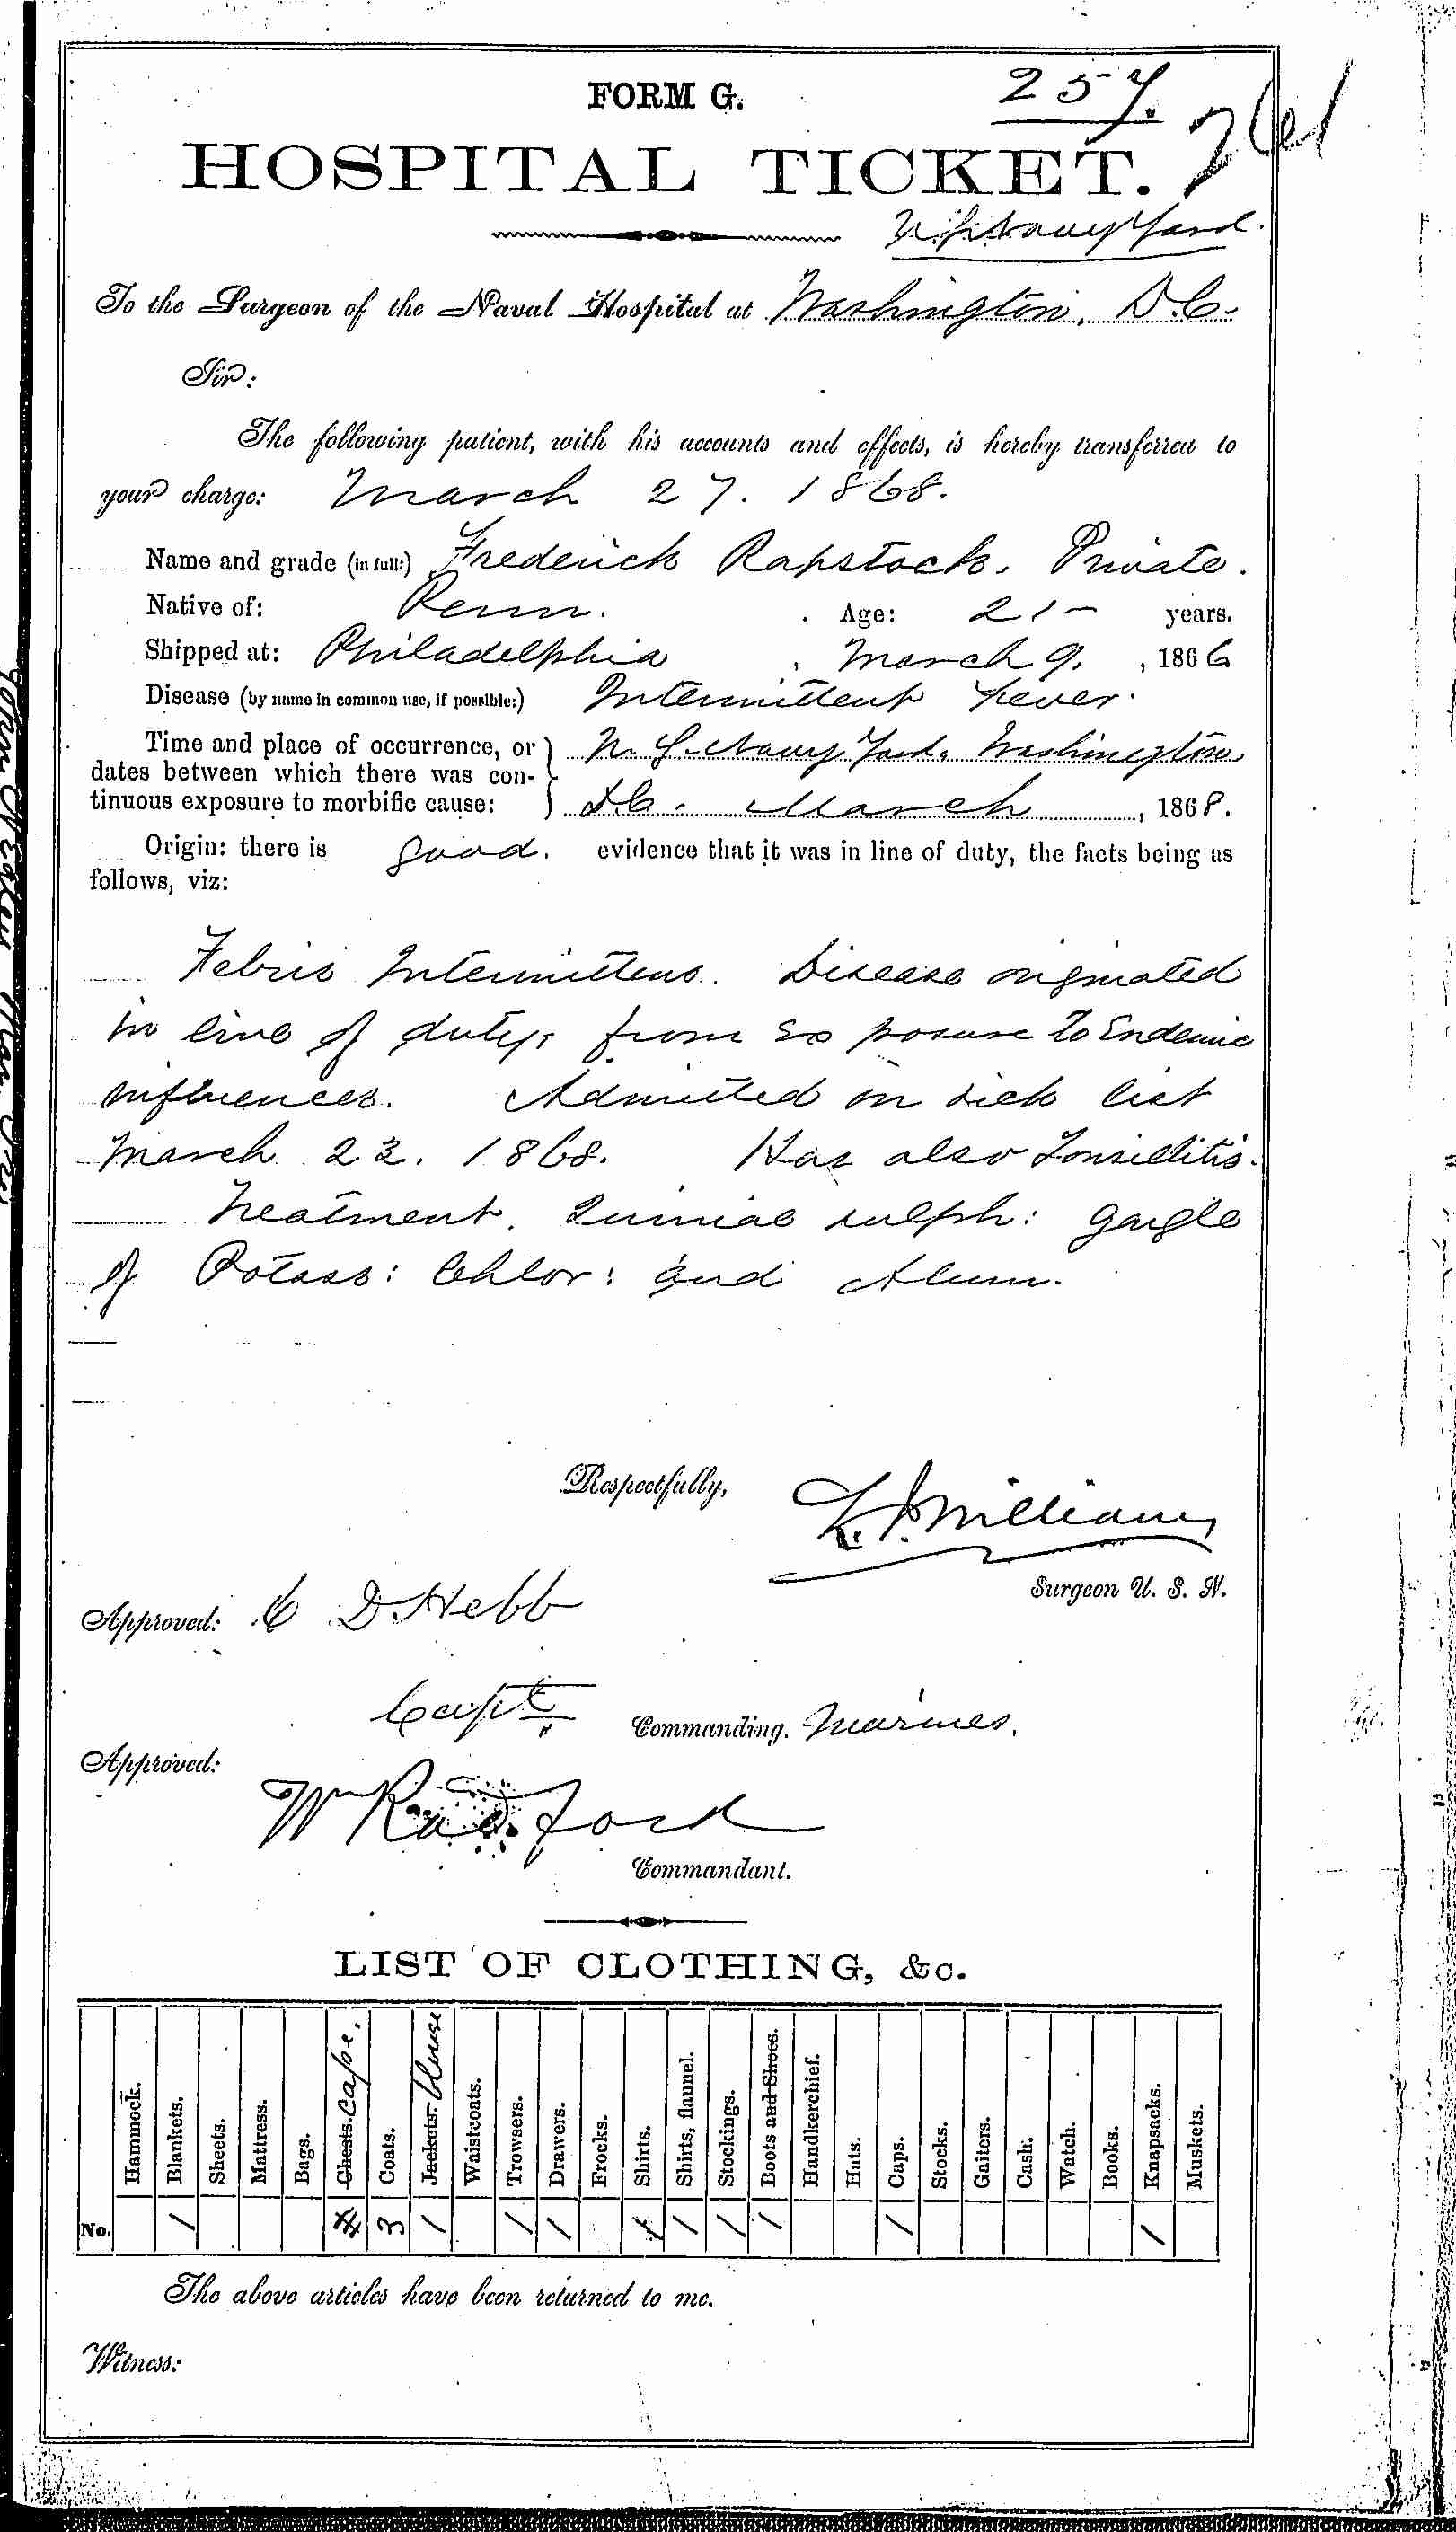 Entry for Frederick Rapstock (second admission page 1 of 2) in the log Hospital Tickets and Case Papers - Naval Hospital - Washington, D.C. - 1866-68